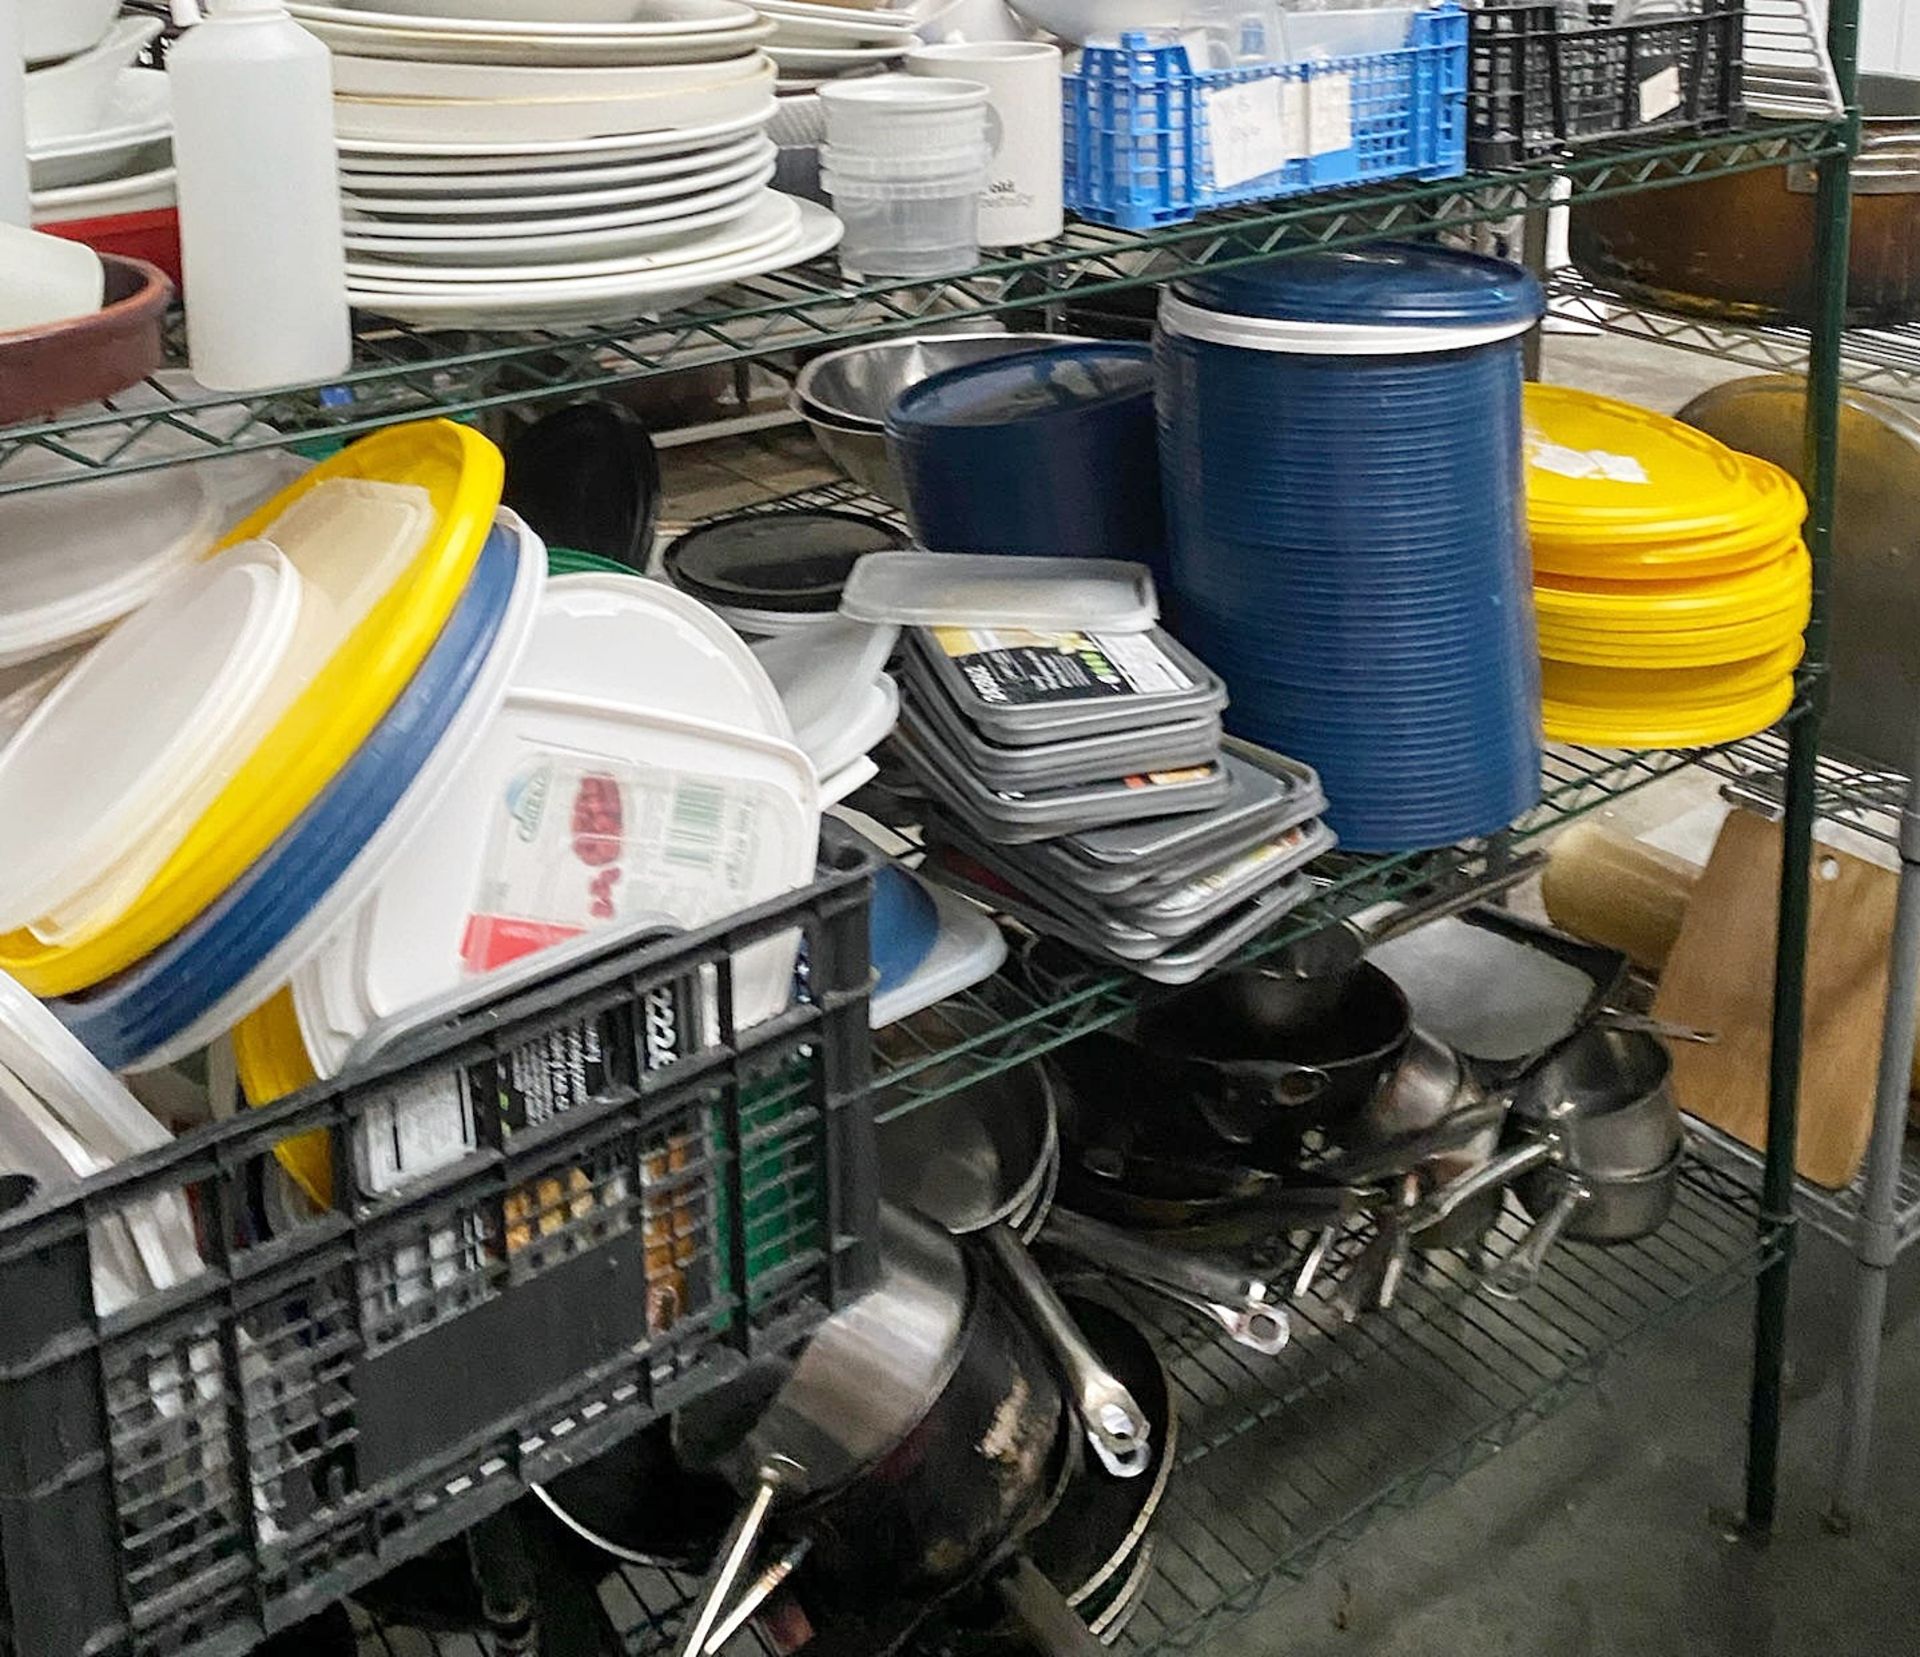 2 x Wire Storage Racks With a Large Quantity of Kitchen Utensils and Accessories - Image 3 of 4